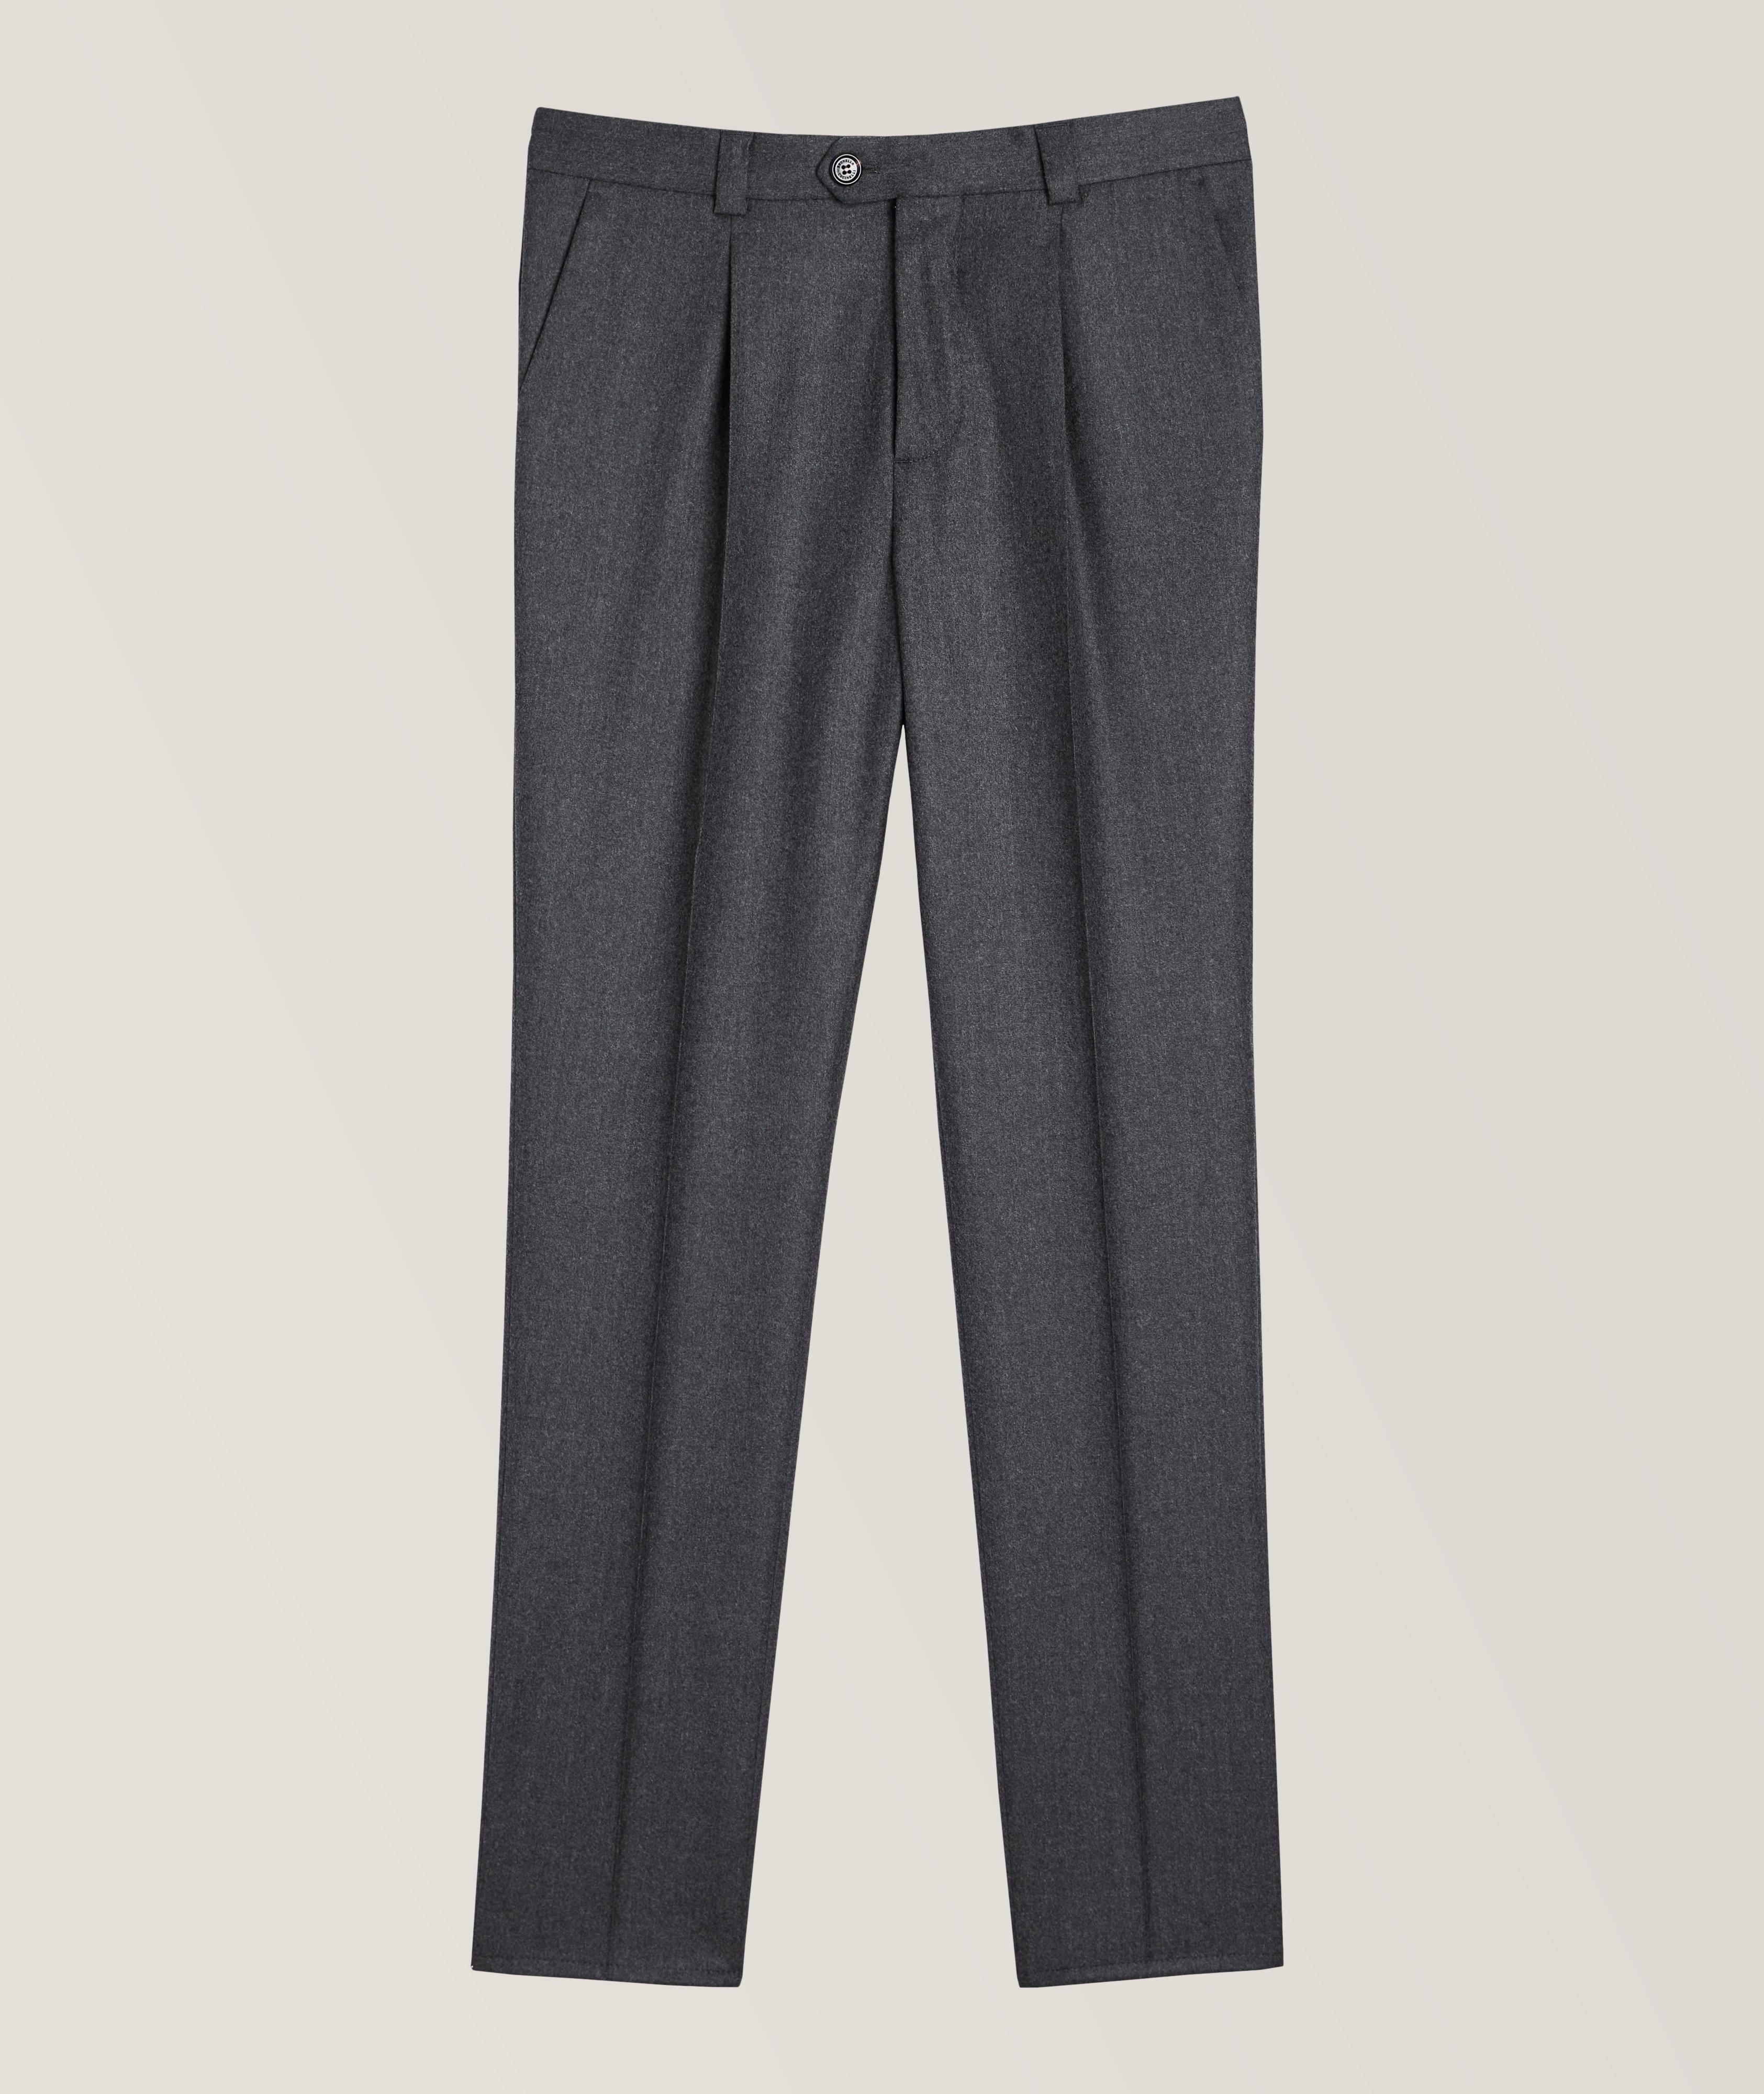 Flannel Wool Leisure Fit Trousers image 0